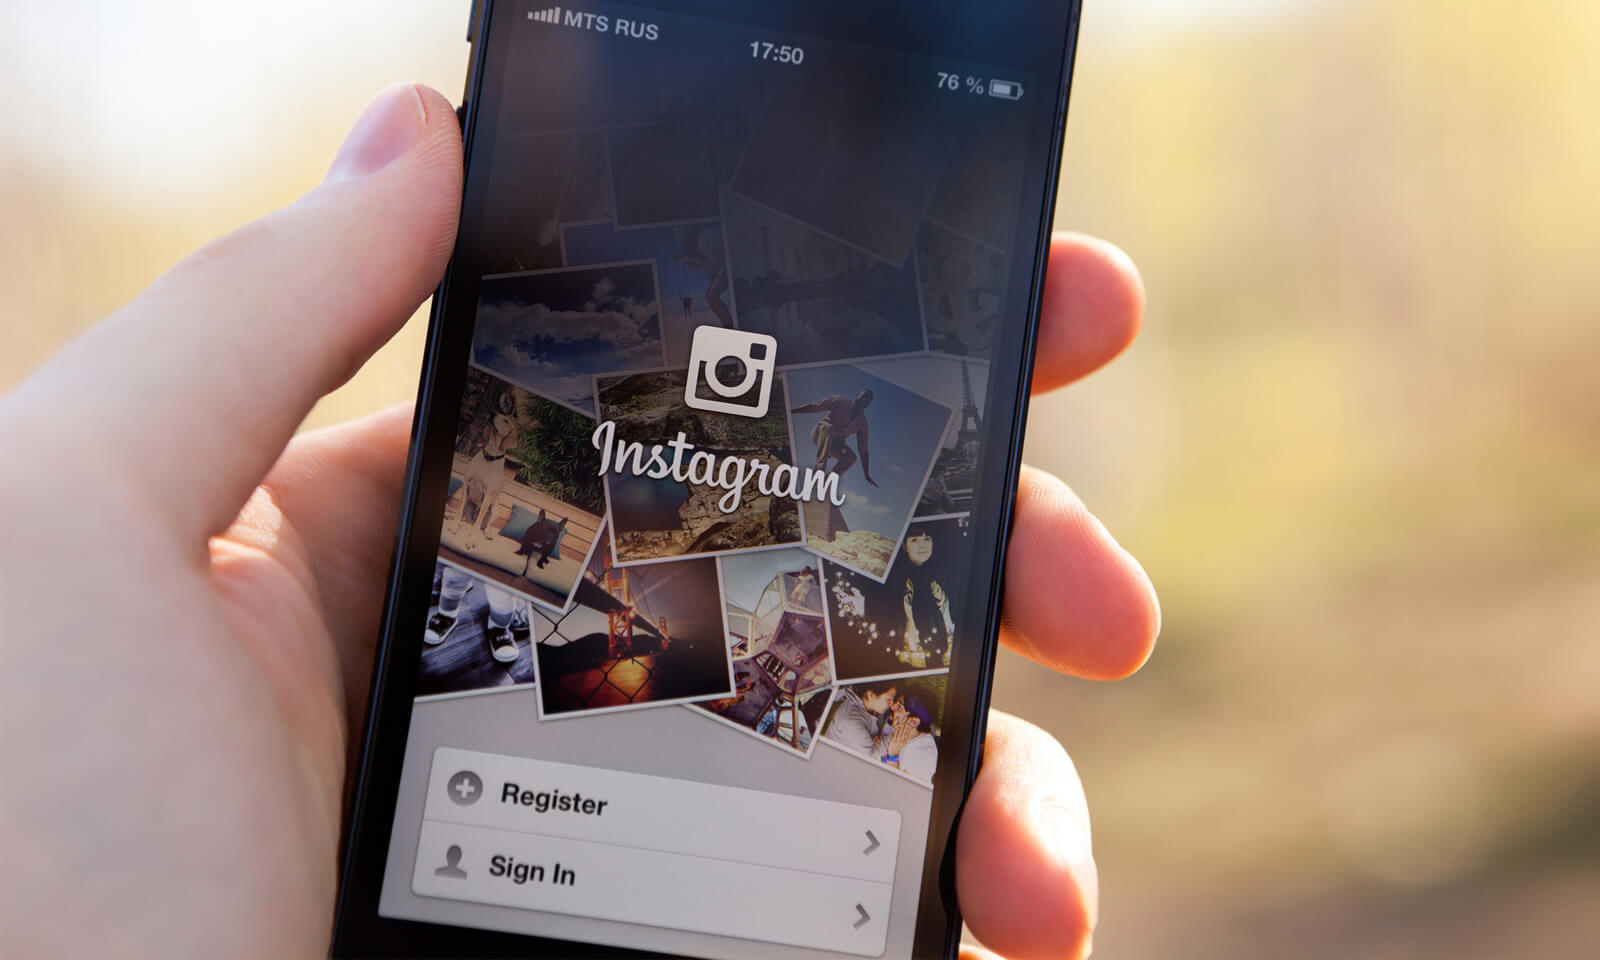 Instagram Marketing for Ecommerce: 5 1/2 Simple Ways to Double Your Instagram Followers